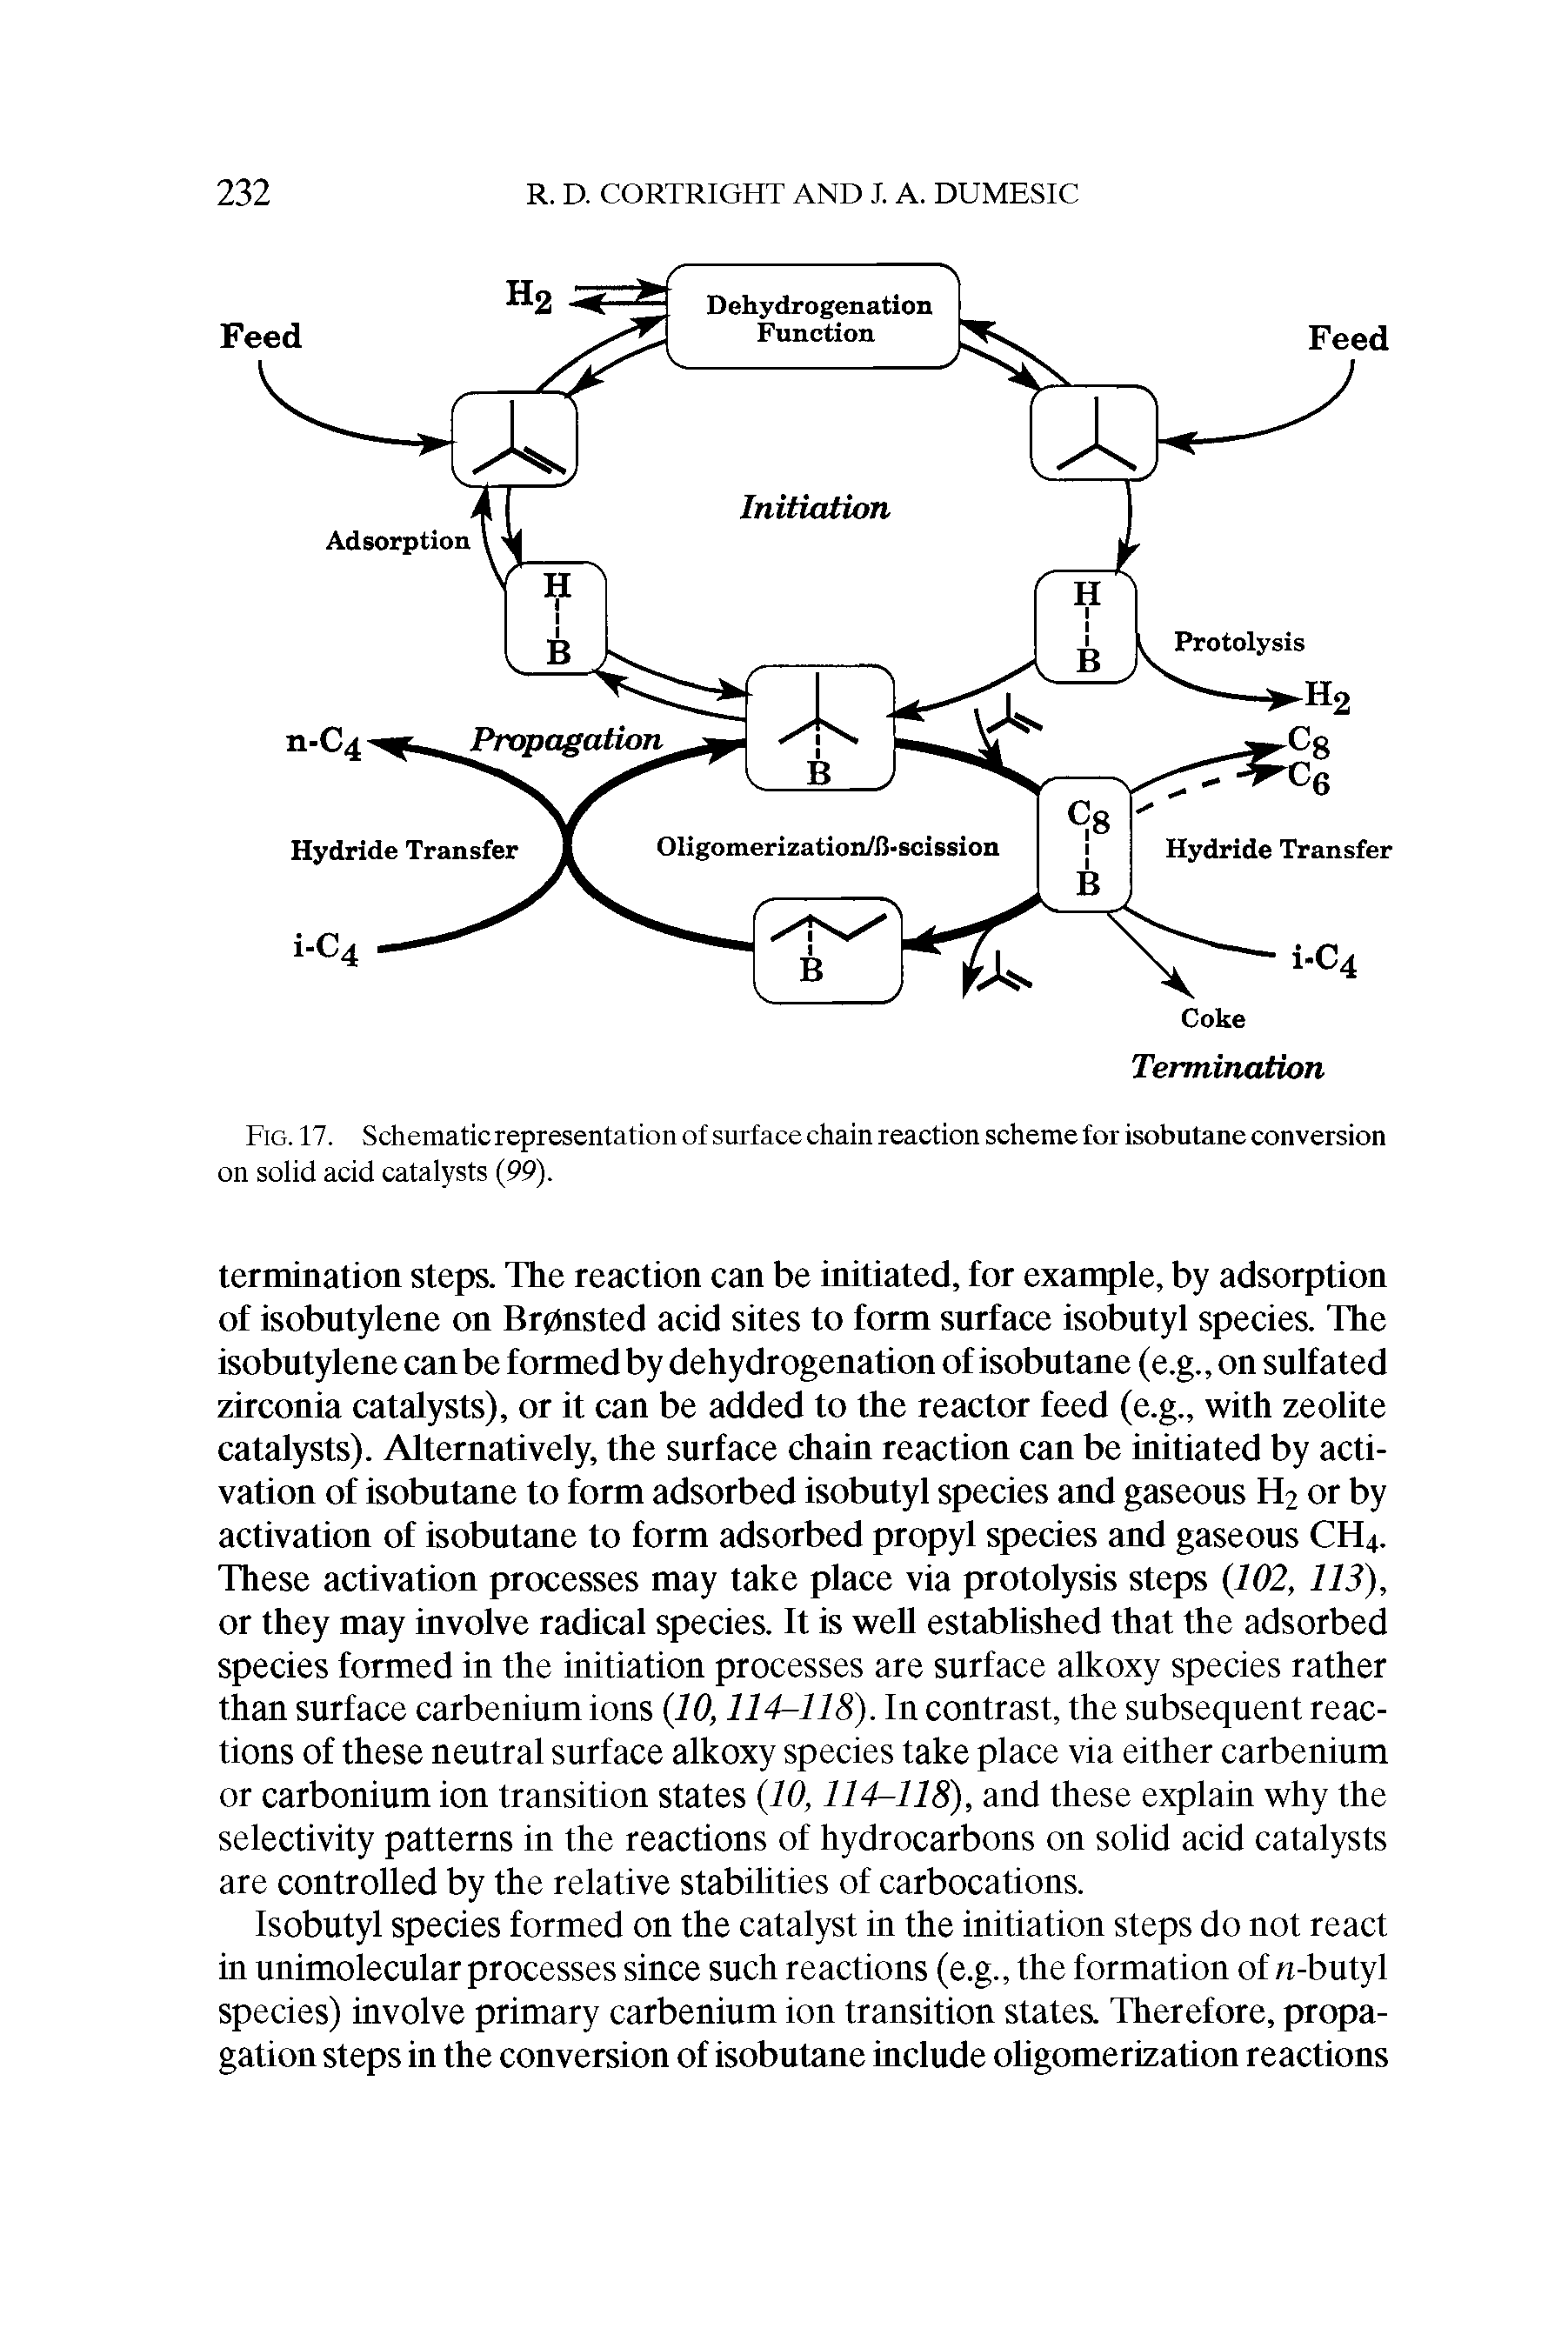 Fig. 17. Schematic representation of surface chain reaction scheme for isobutane conversion on solid acid catalysts (99).